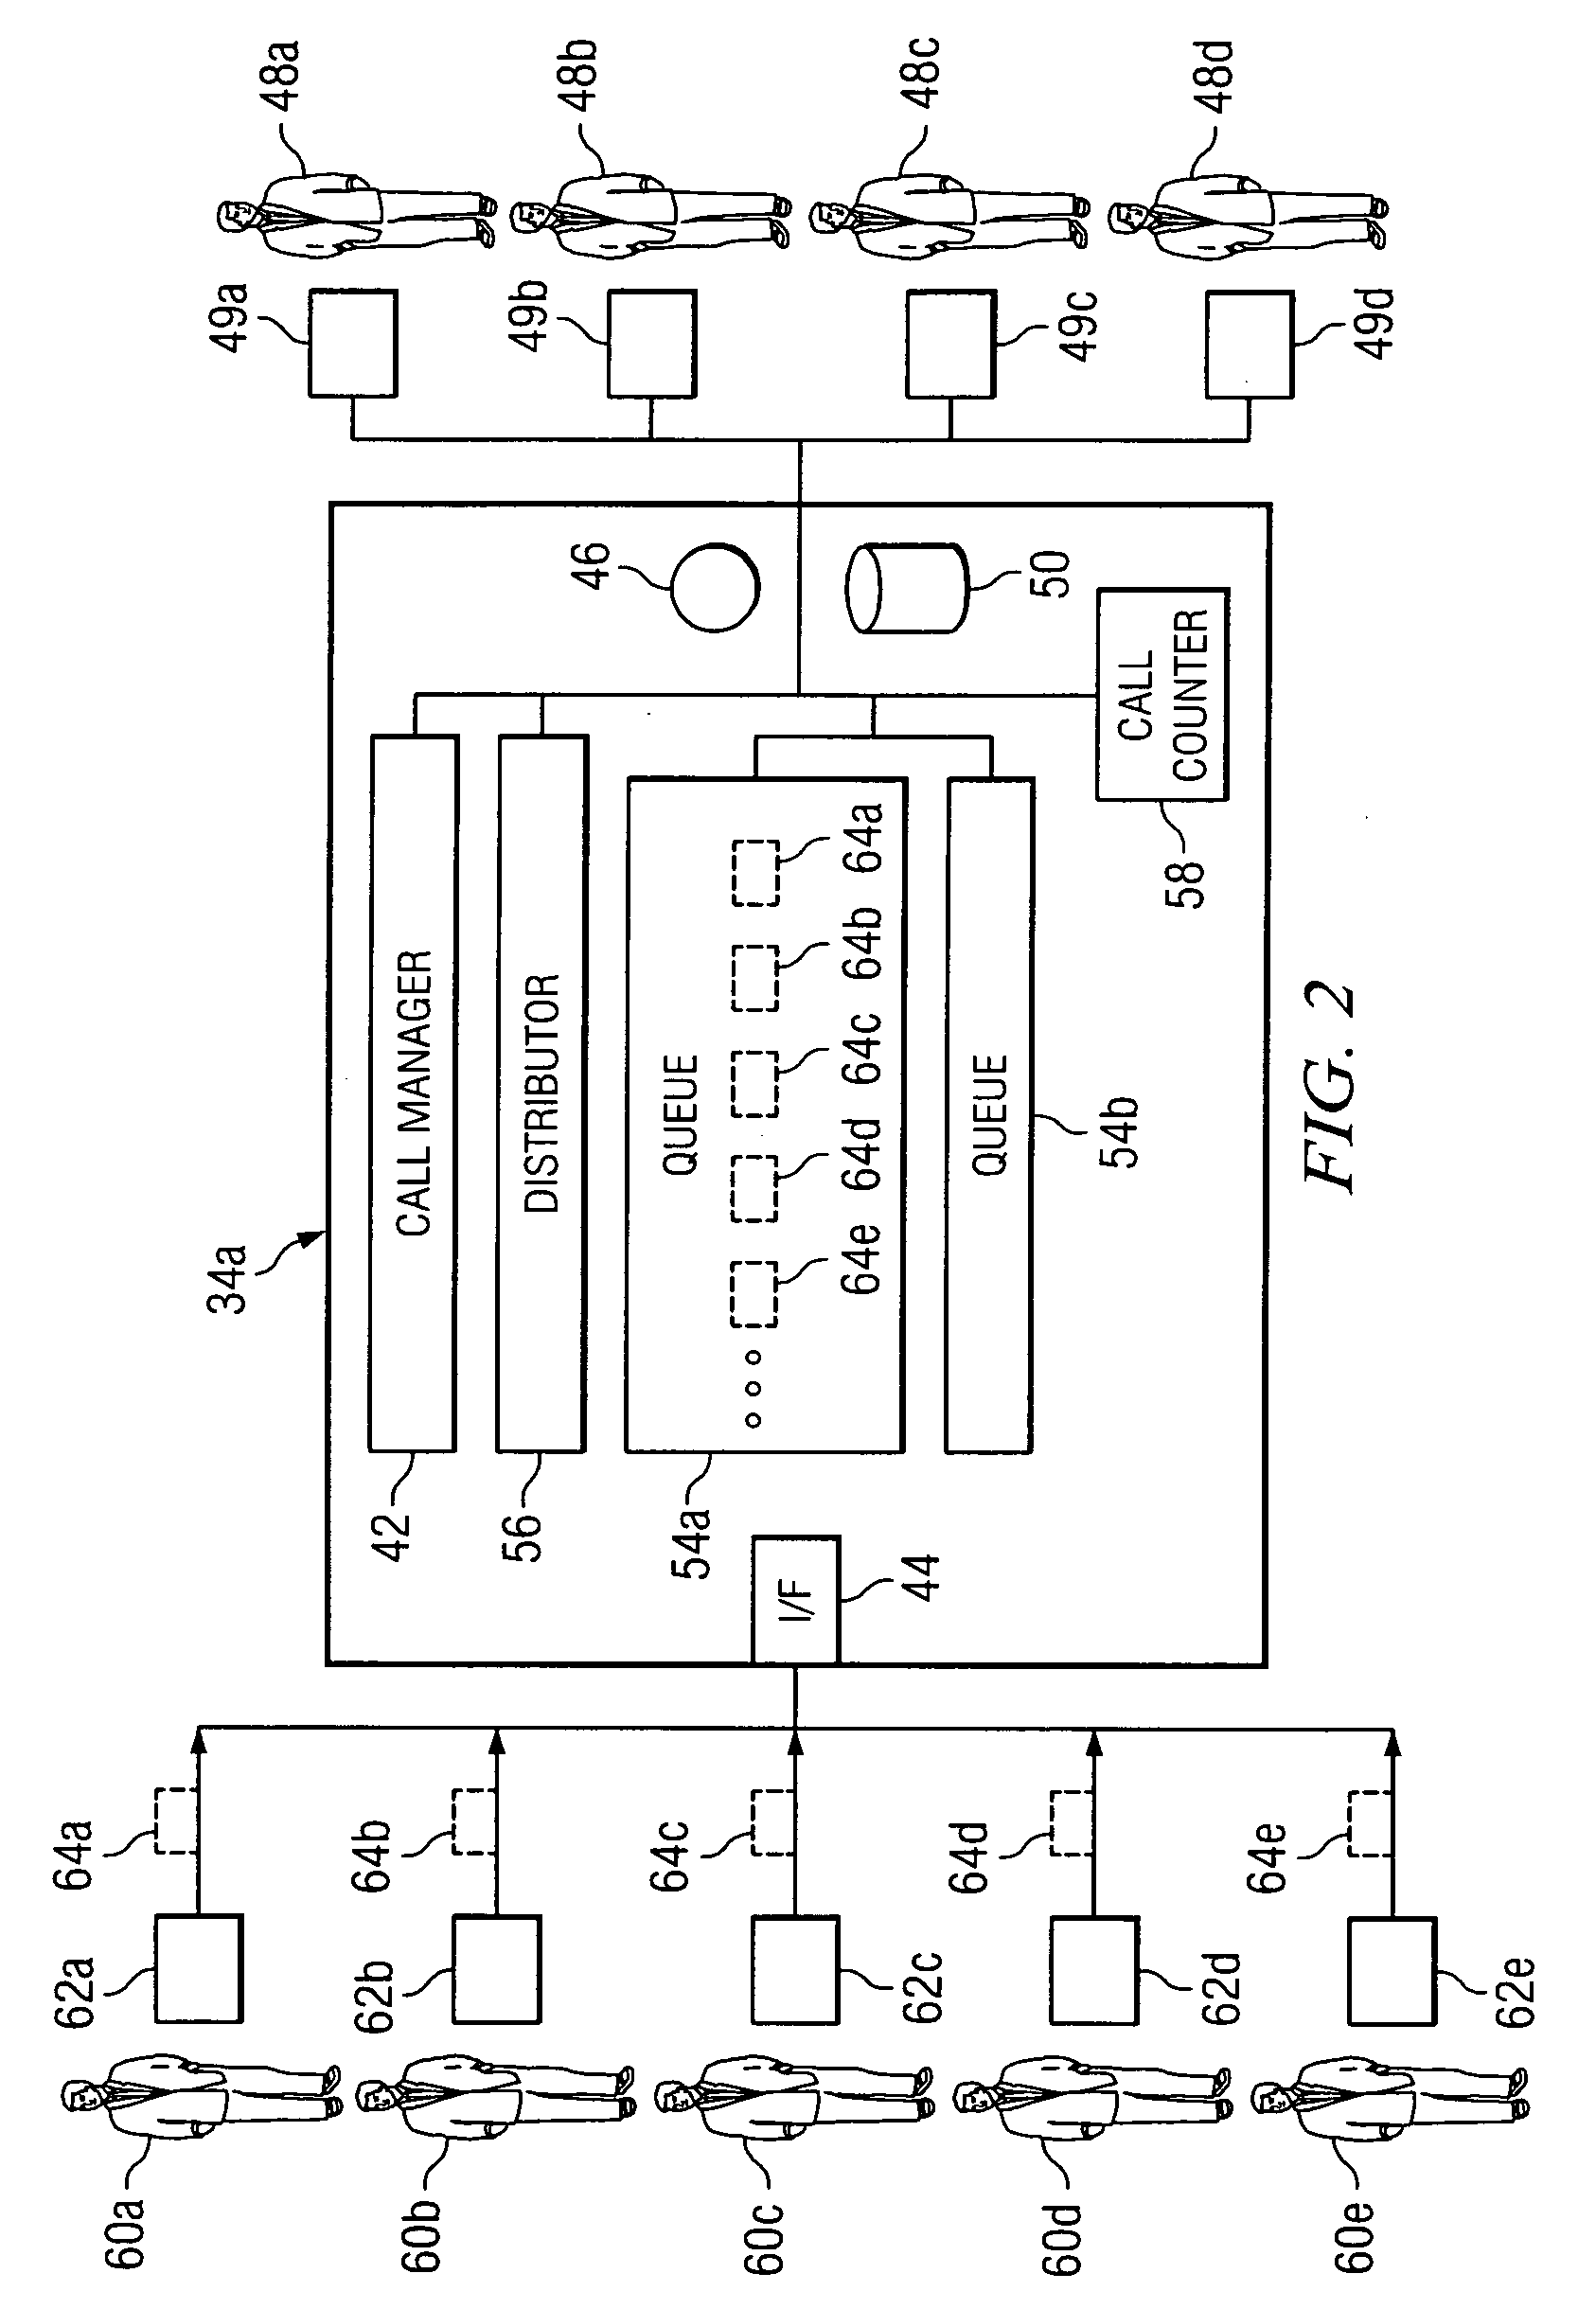 Method and system for distributing calls